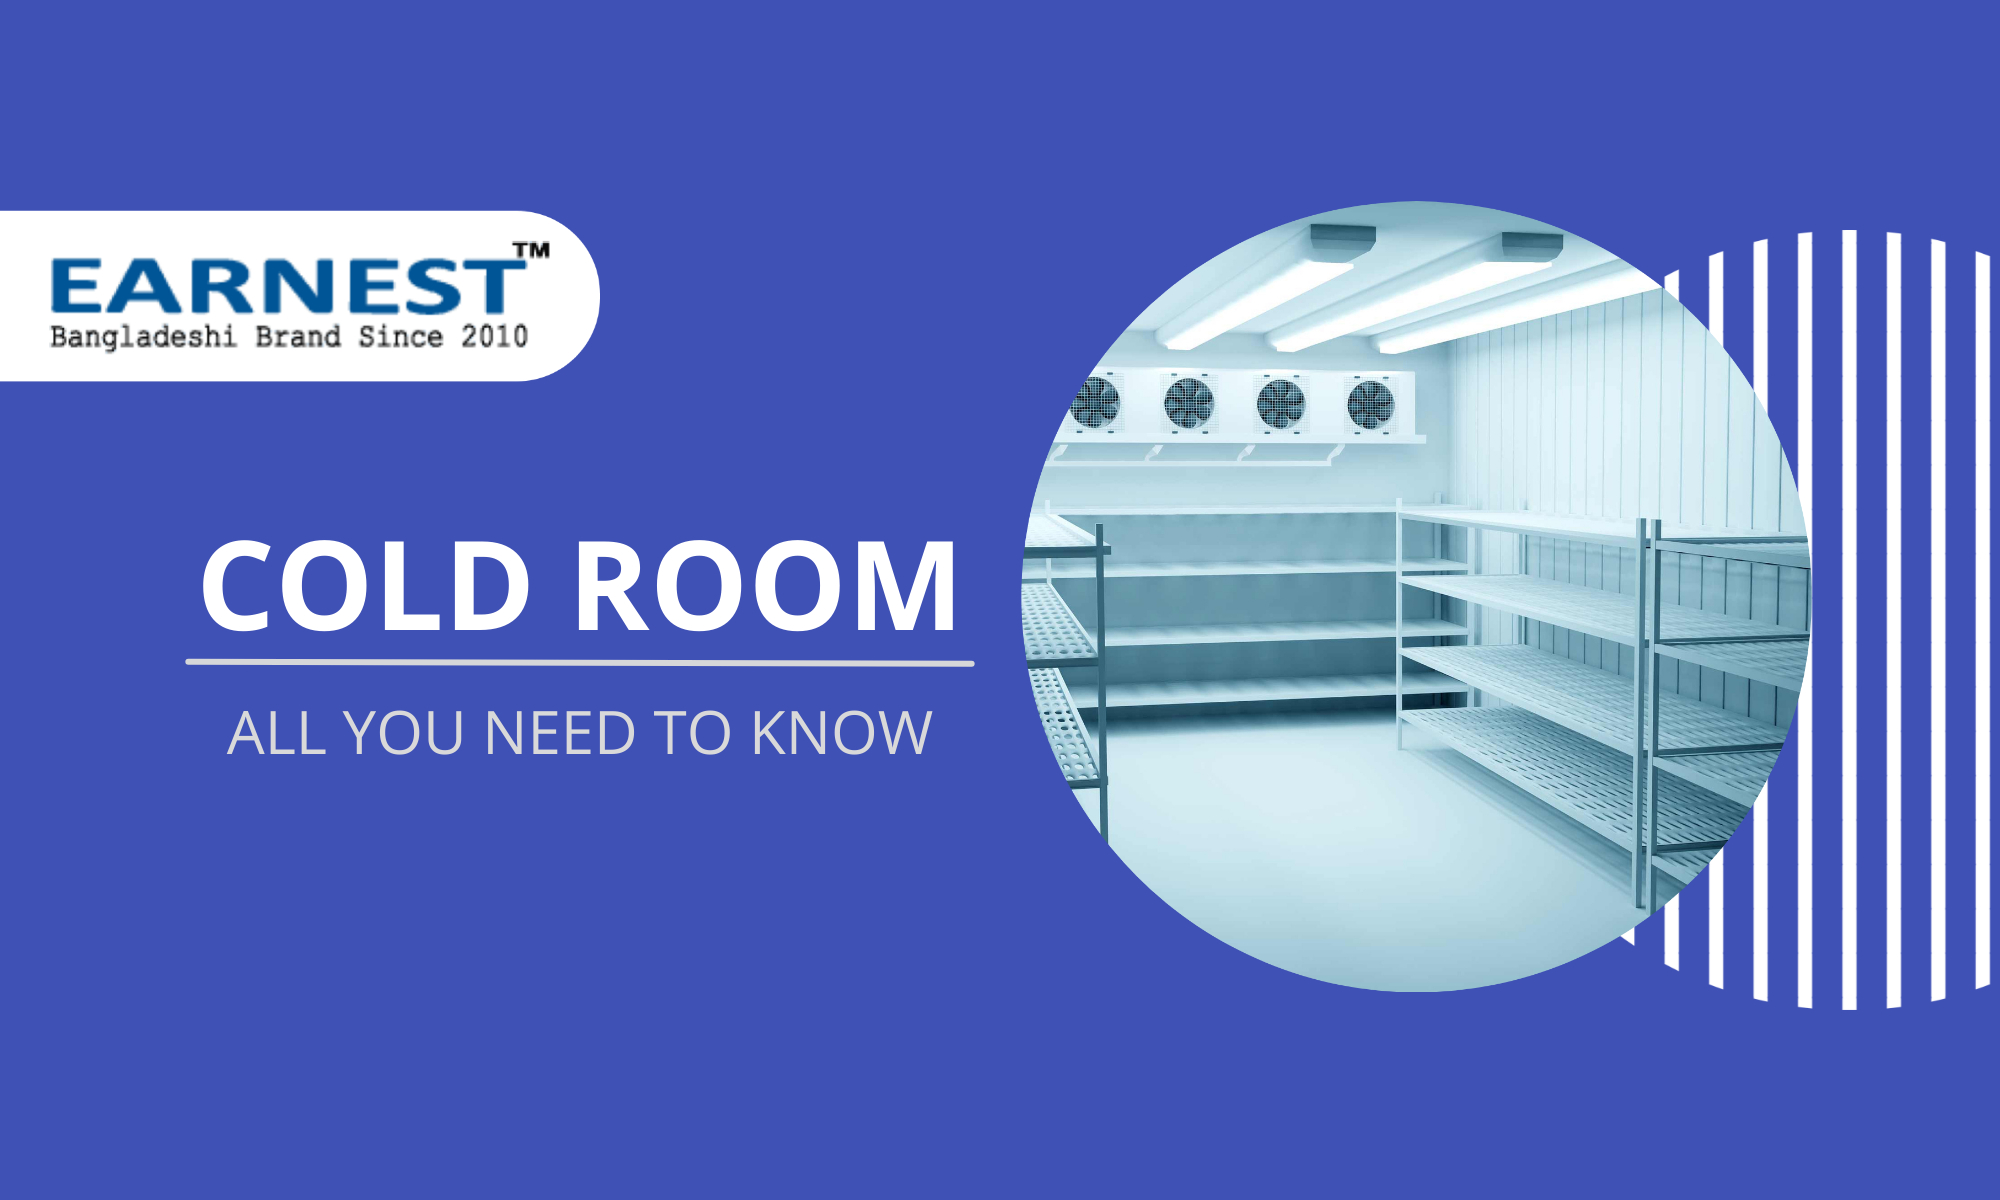 Cold room - all you need to know